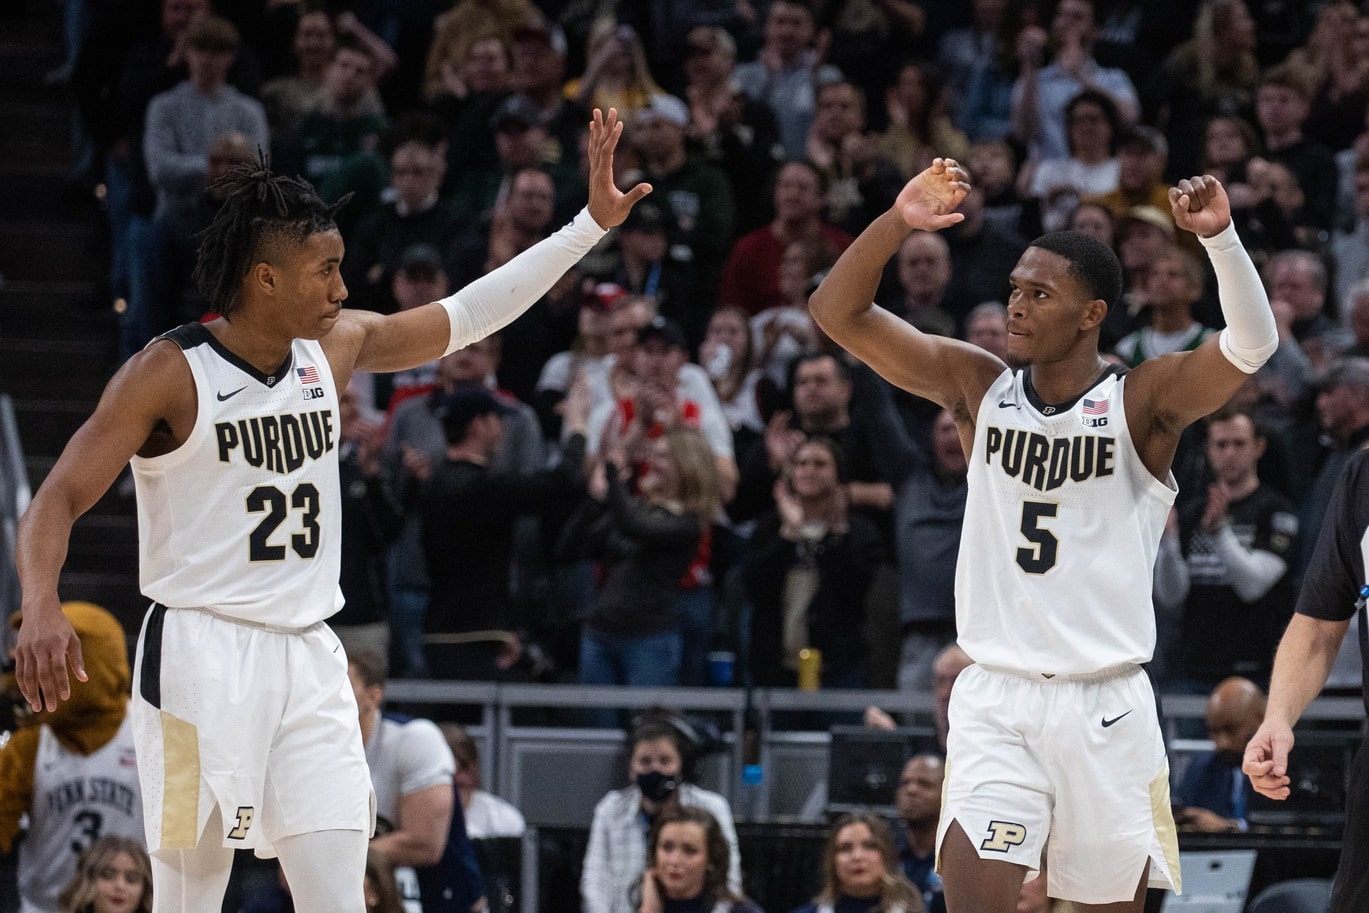 Mar 11, 2022; Indianapolis, IN, USA; Purdue Boilermakers guard Jaden Ivey (23) and guard Brandon Newman (5) celebrate the win against the Penn State Nittany Lions at Gainbridge Fieldhouse.